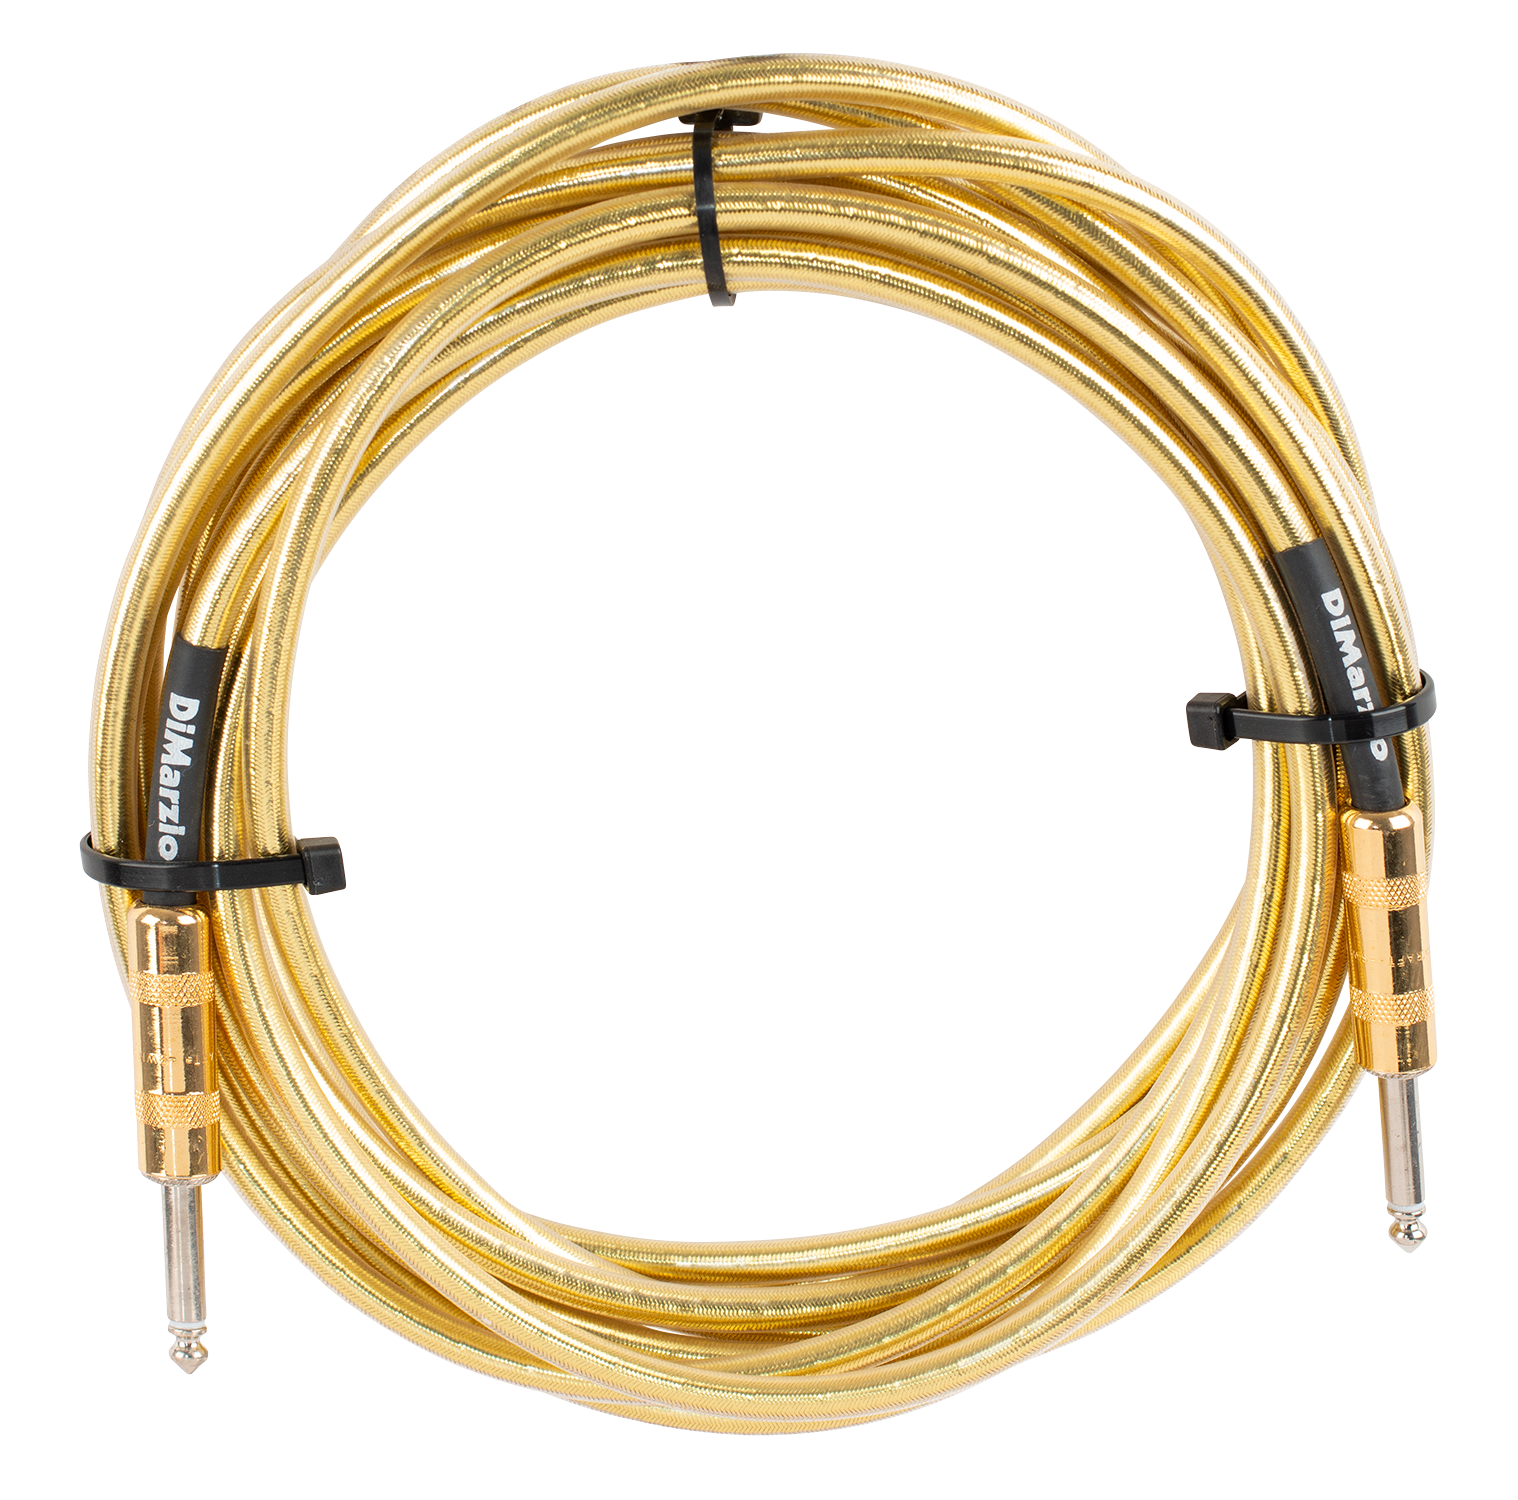 Dimarzio 18Ft Pro Guitar Cable - Straight To Straight Metallic Gold